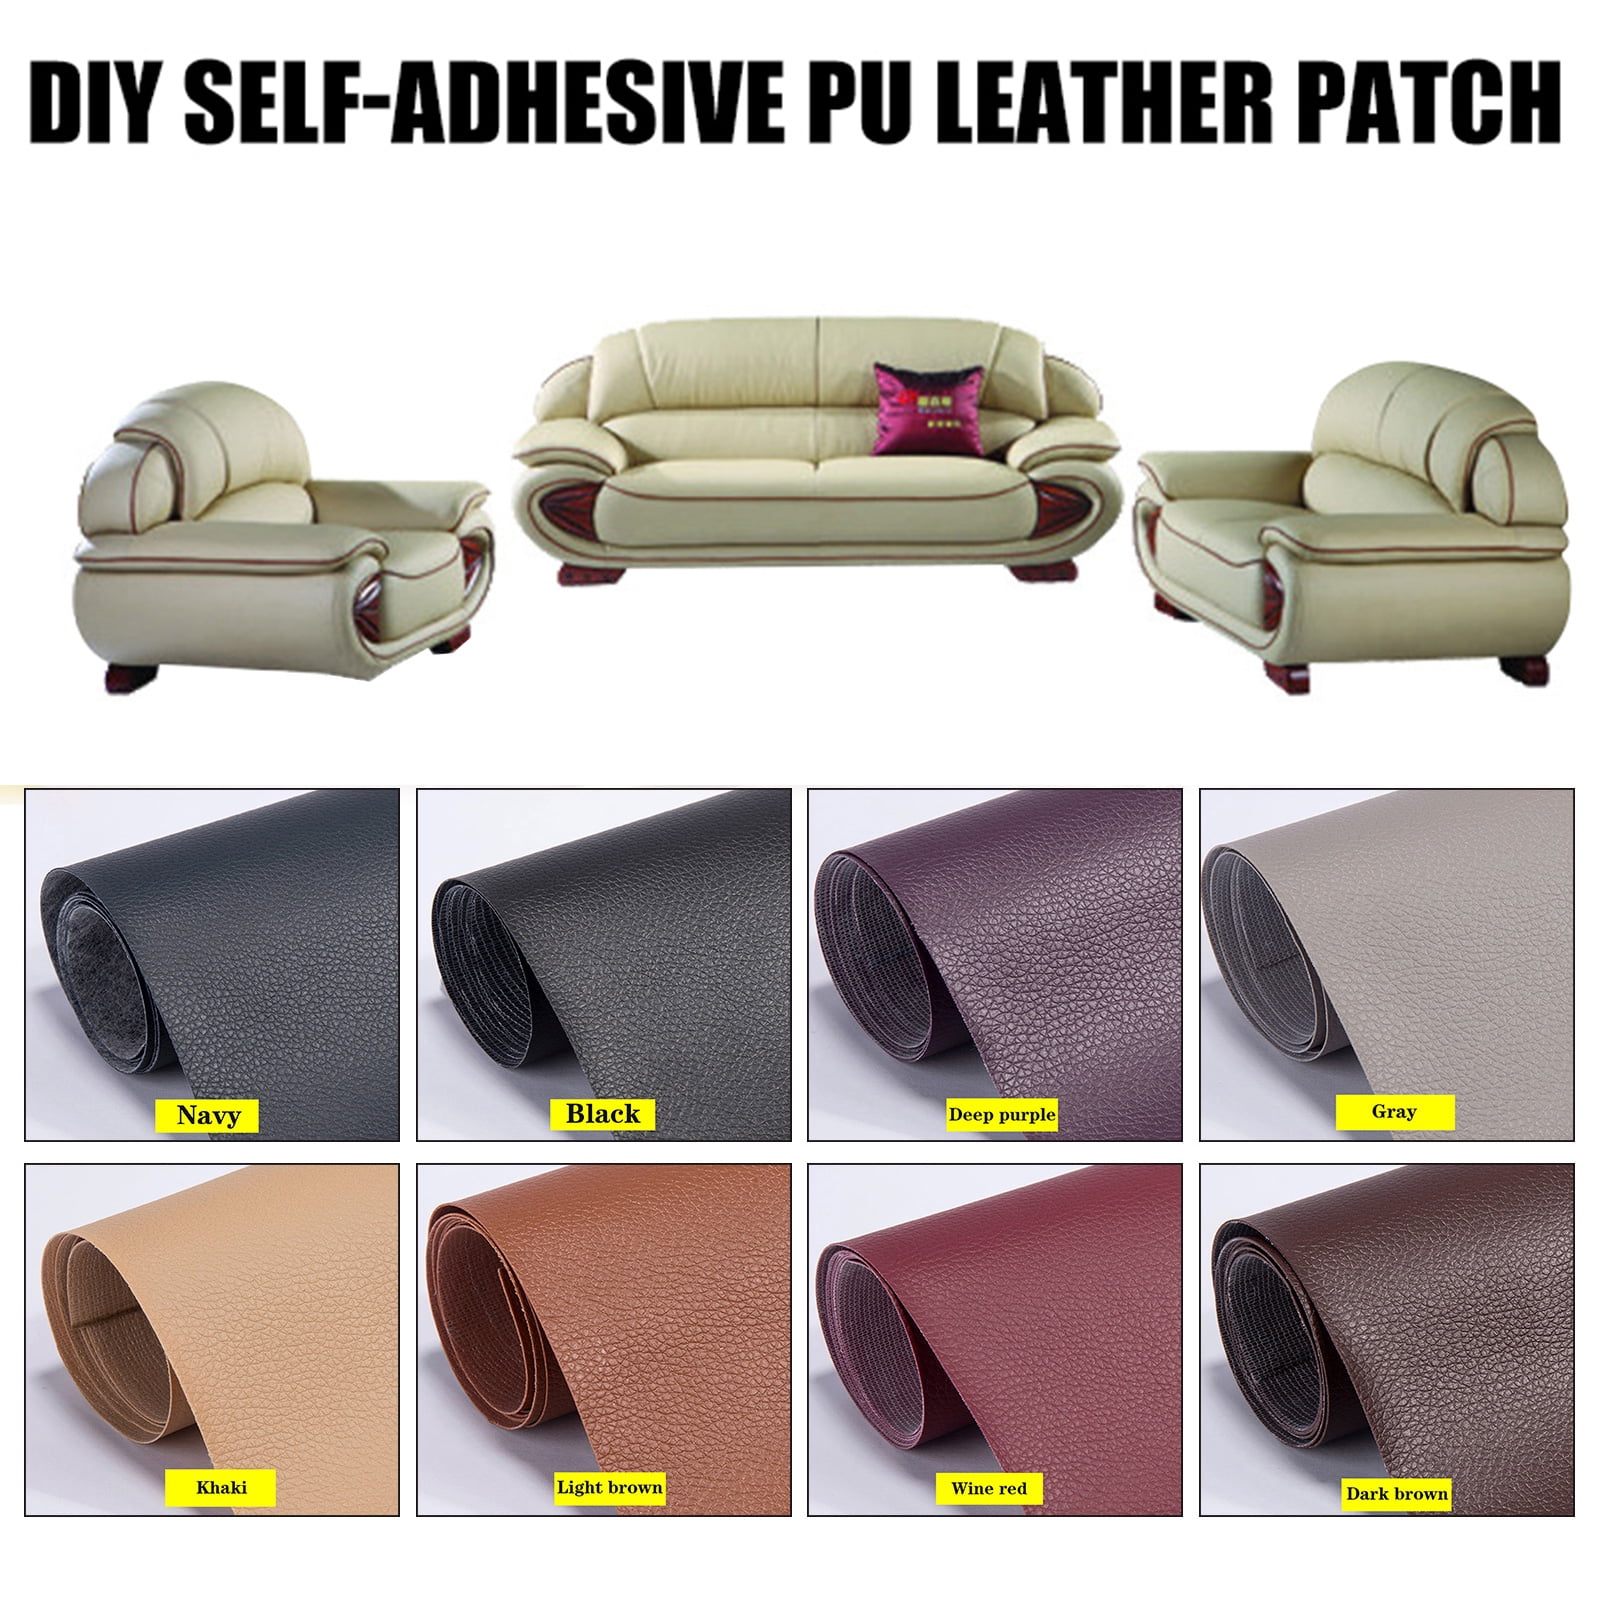 Leather Repair Patch Kit 8 x 12 inch, 7 Colors Available, Stuffygreenus  Self-Adhesive Leather Tape for Couches, Chairs, Car Seats, Bags, Jackets